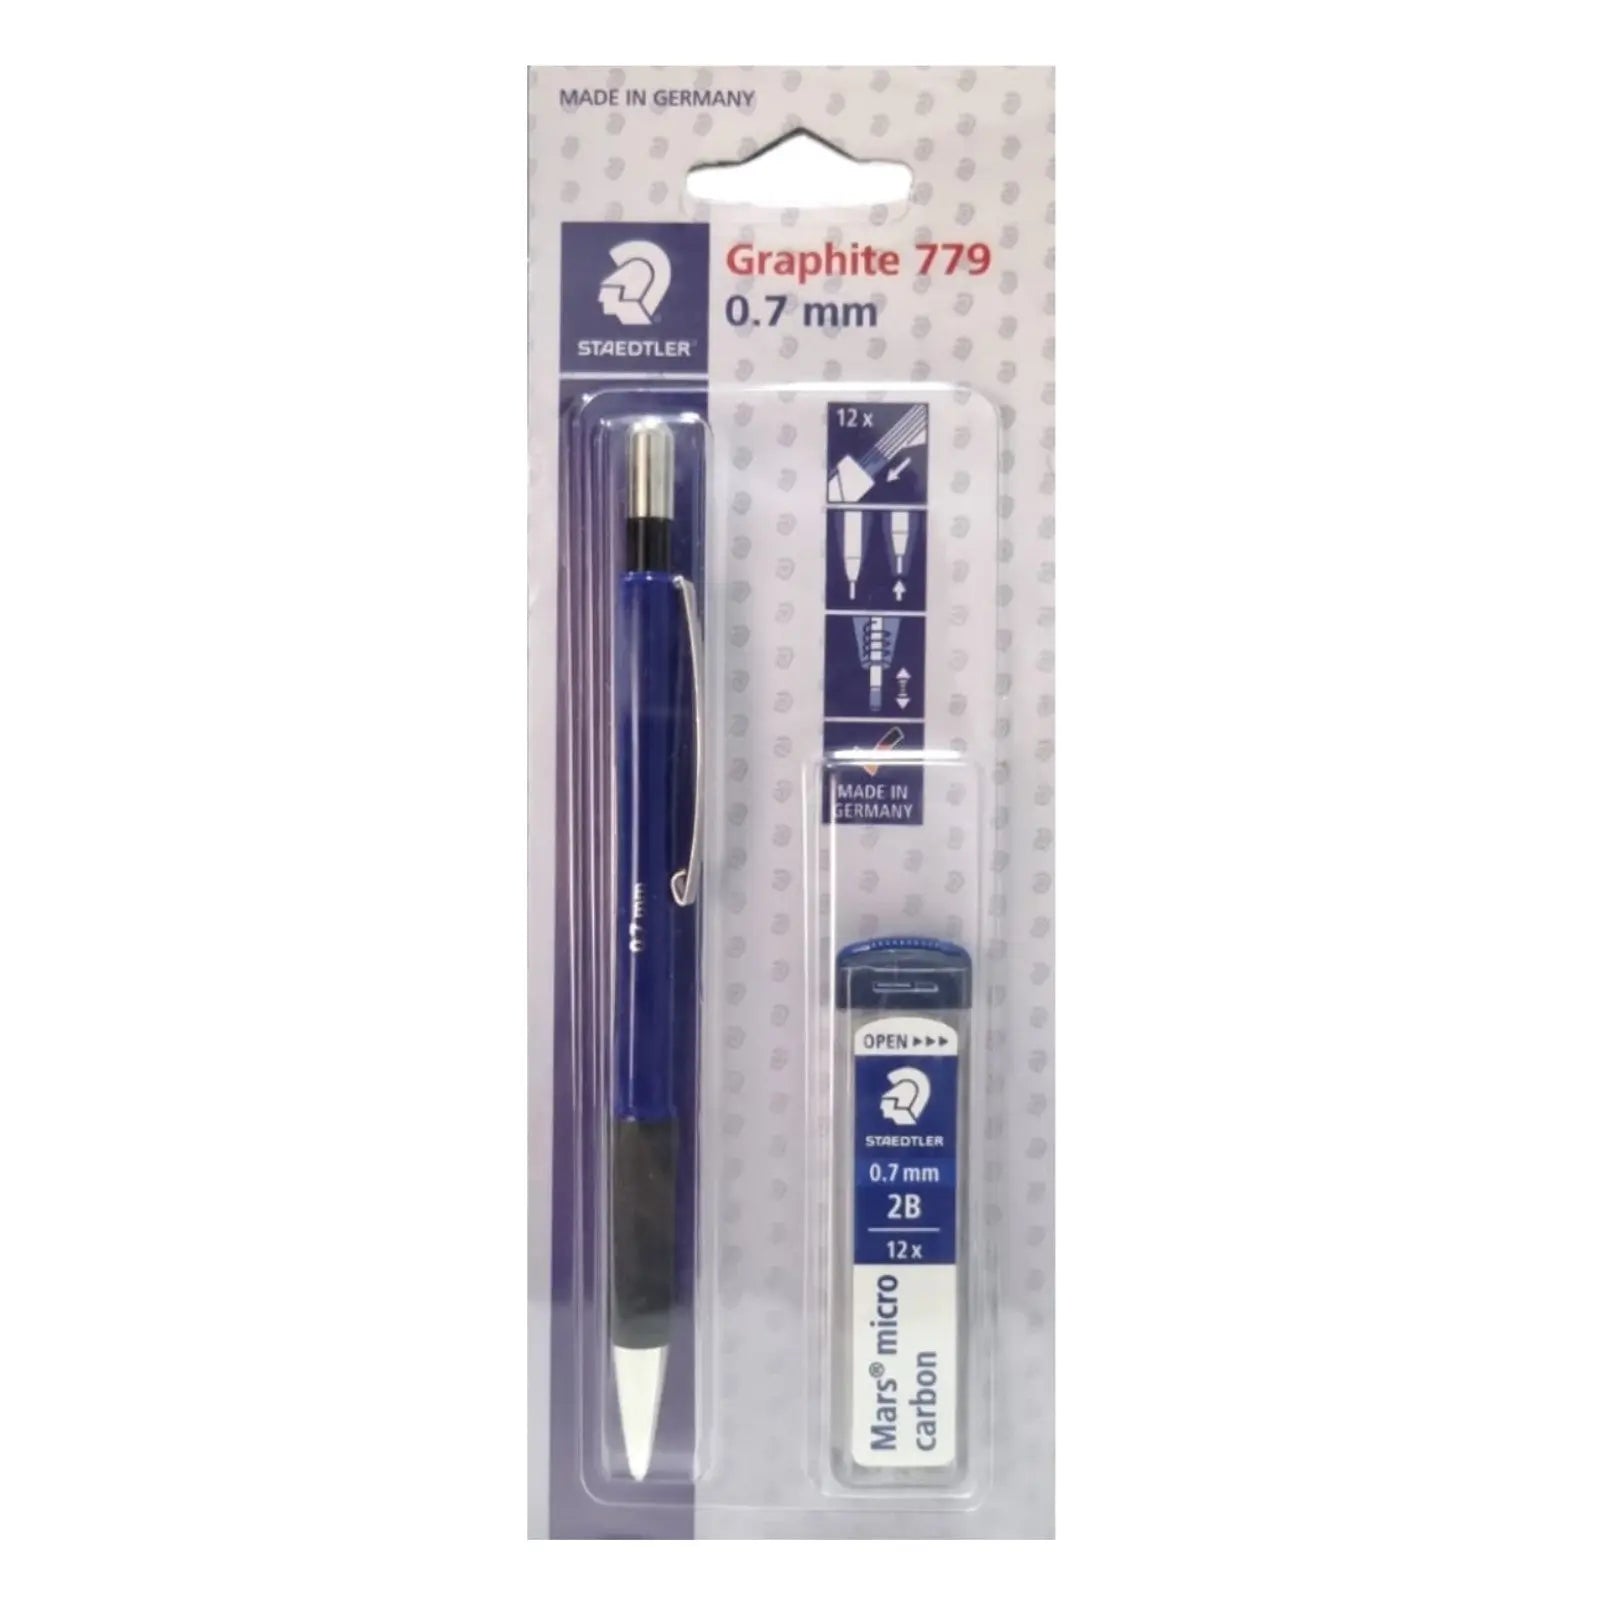 Staedtler Graphite 779 0.7mm Mechanical Pencil with 1 Pack lead Staedtler